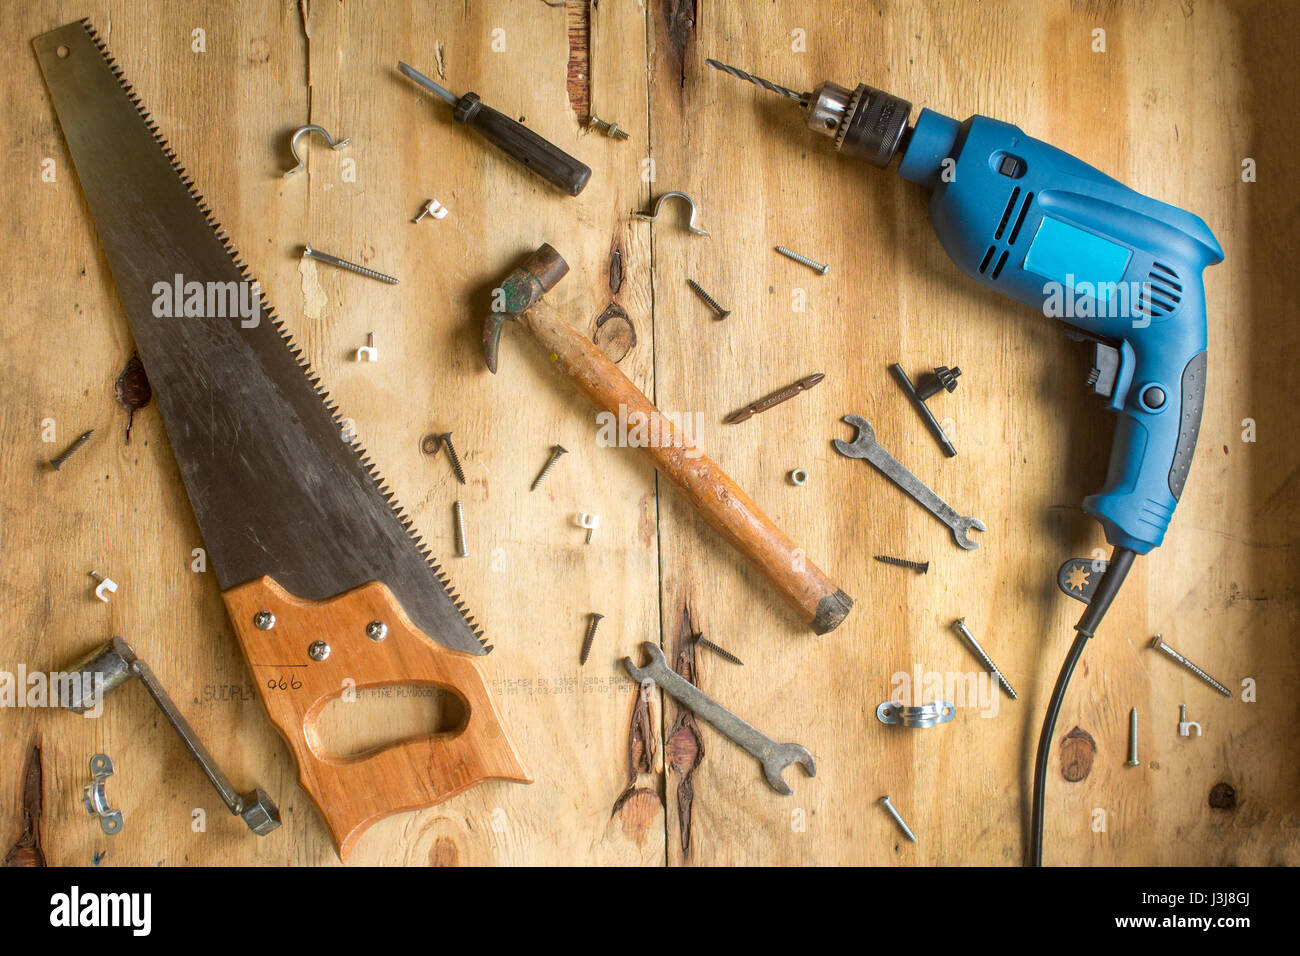 Hammer and screws on wooden background Stock Photo